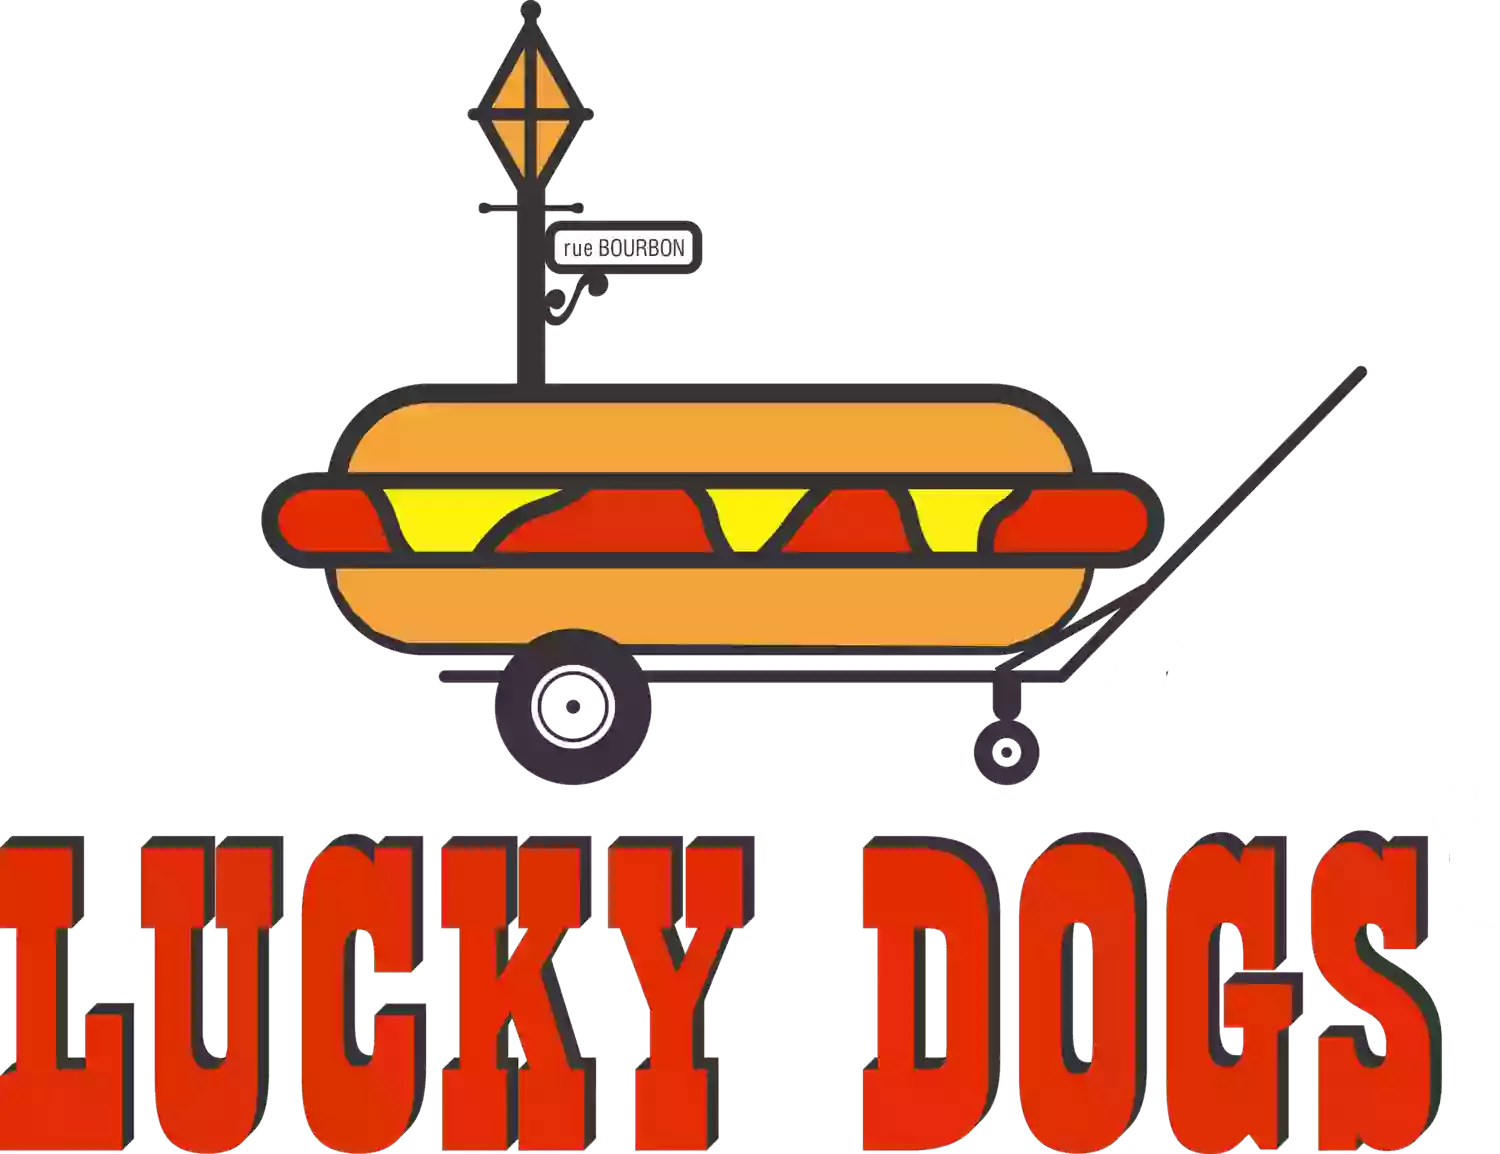 Lucky Dogs